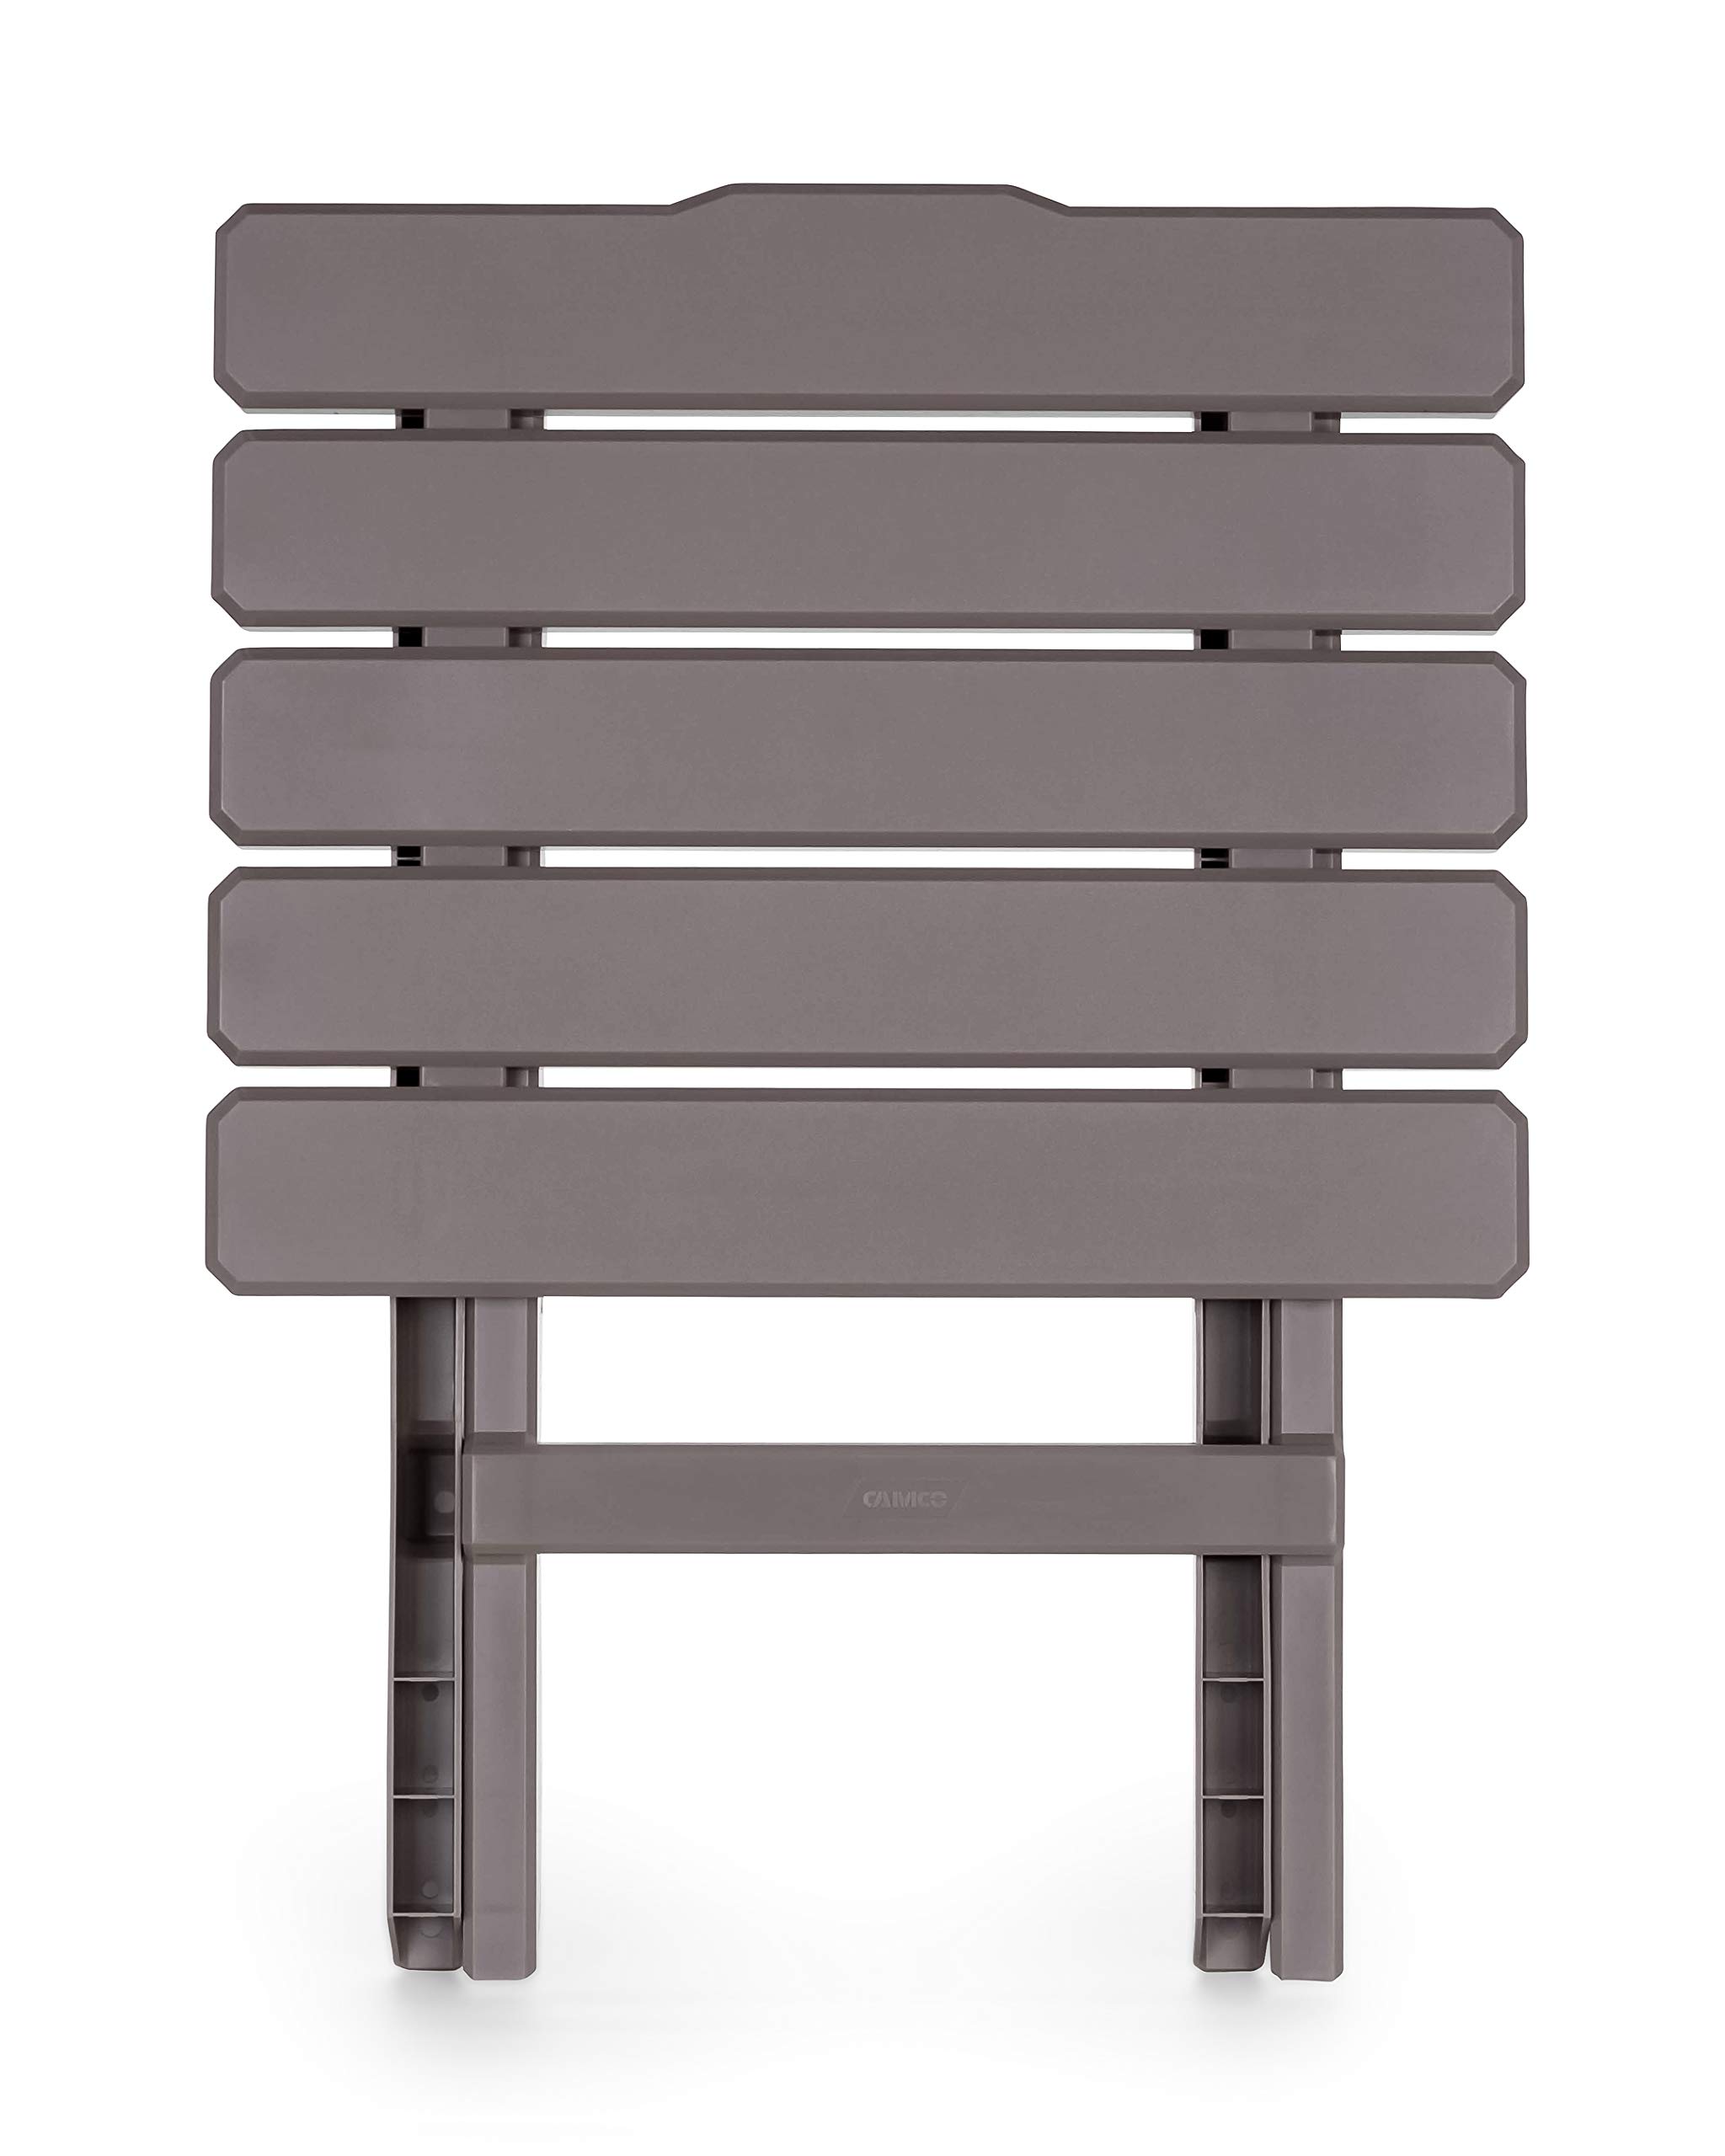 camco 21049 51887 Taupe Large Adirondack Portable Outdoor Folding Side Table, Perfect for The Beach, camping, Picnics, cookouts 